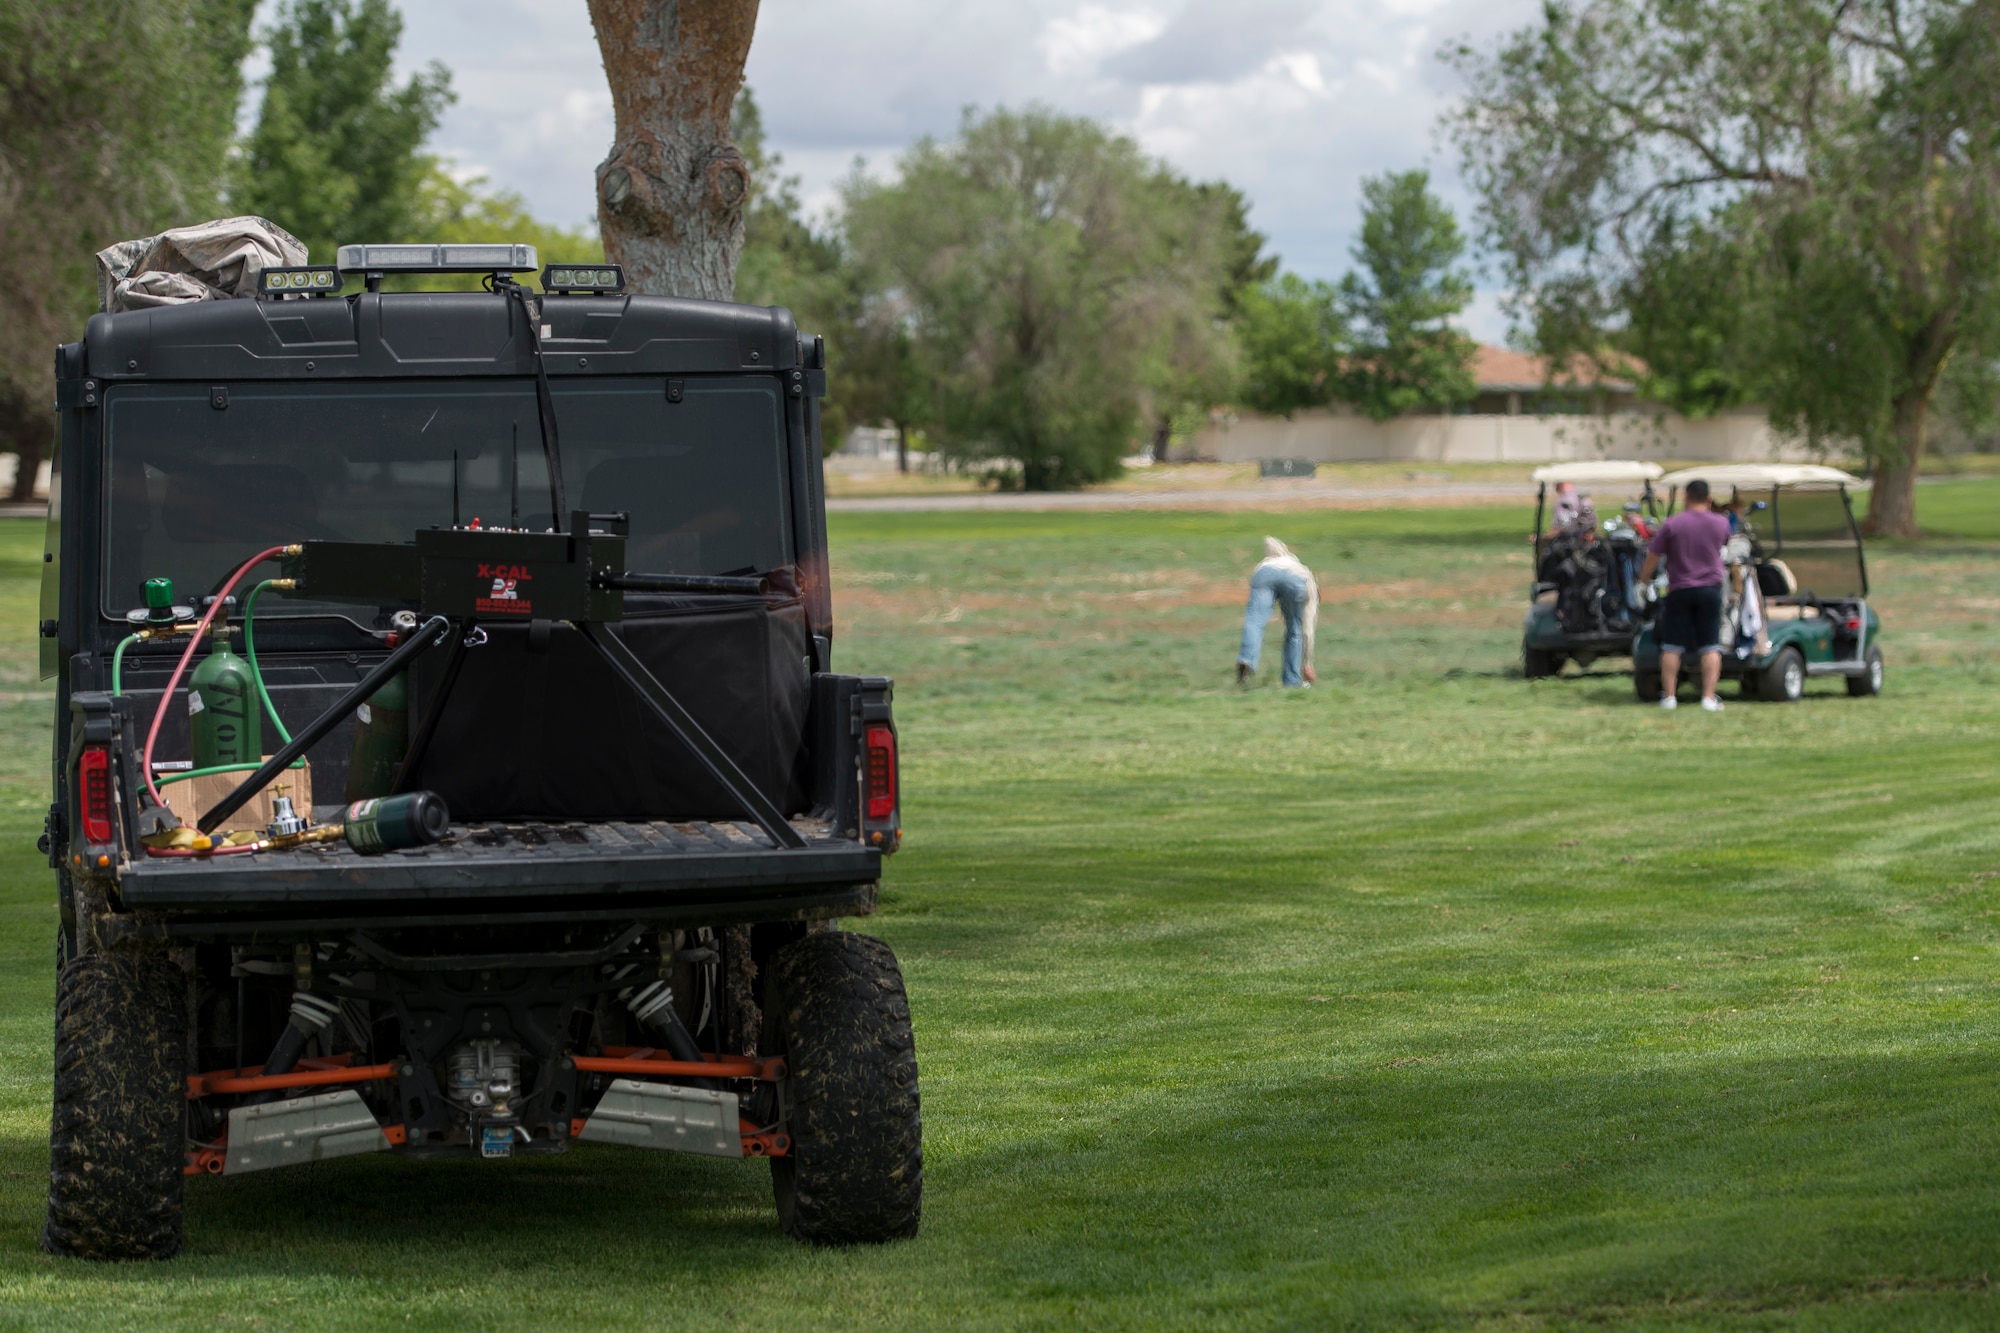 A photo of competitors playing golf while a simulated machine gun fires behind them May 18, 2018, at Mountain Home Air Force Base, Idaho. The combat golf tournament used simulated gun fire, drunk goggles, breaching equipment and handcuffs as multiple obstacle courses to create the event. (U.S. Air Force Photo by Airman 1st Class JaNae Capuno)